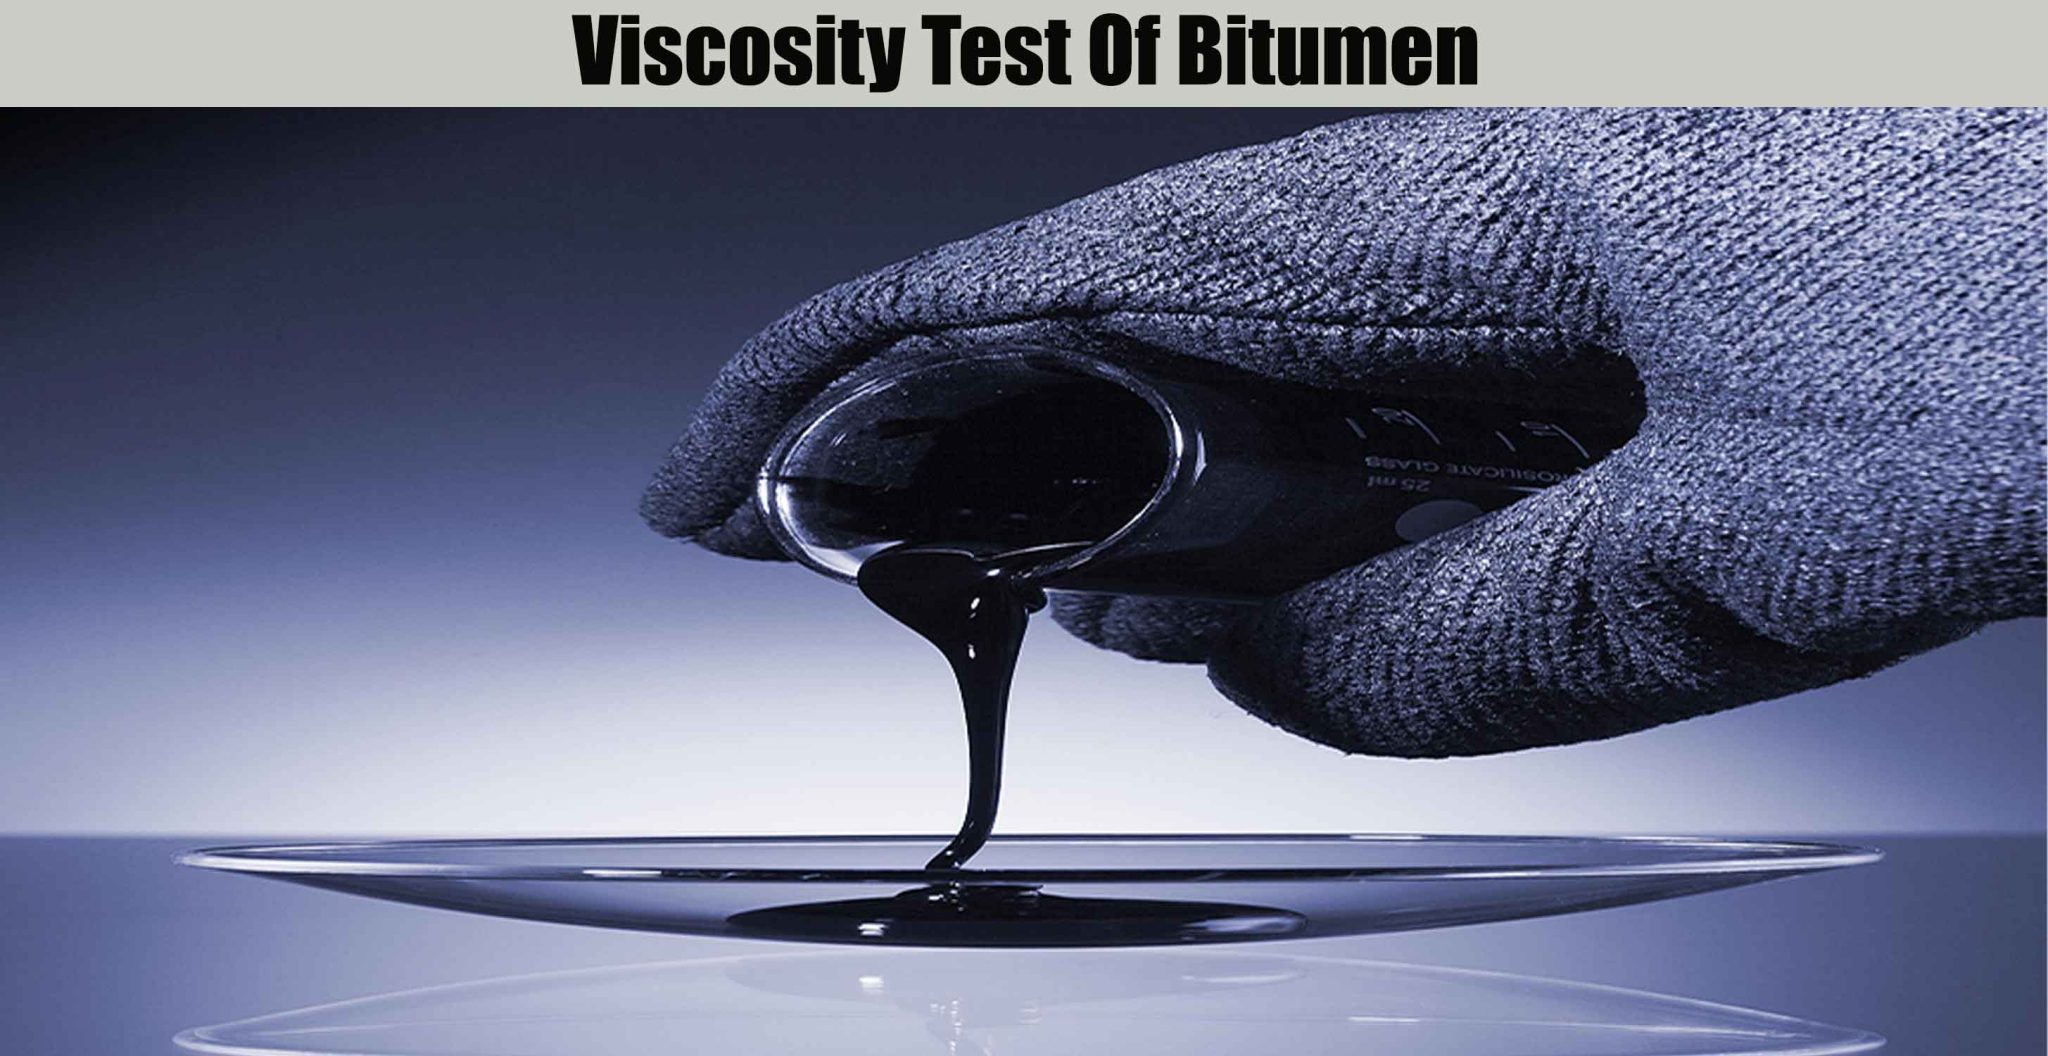 viscosity meaning in english